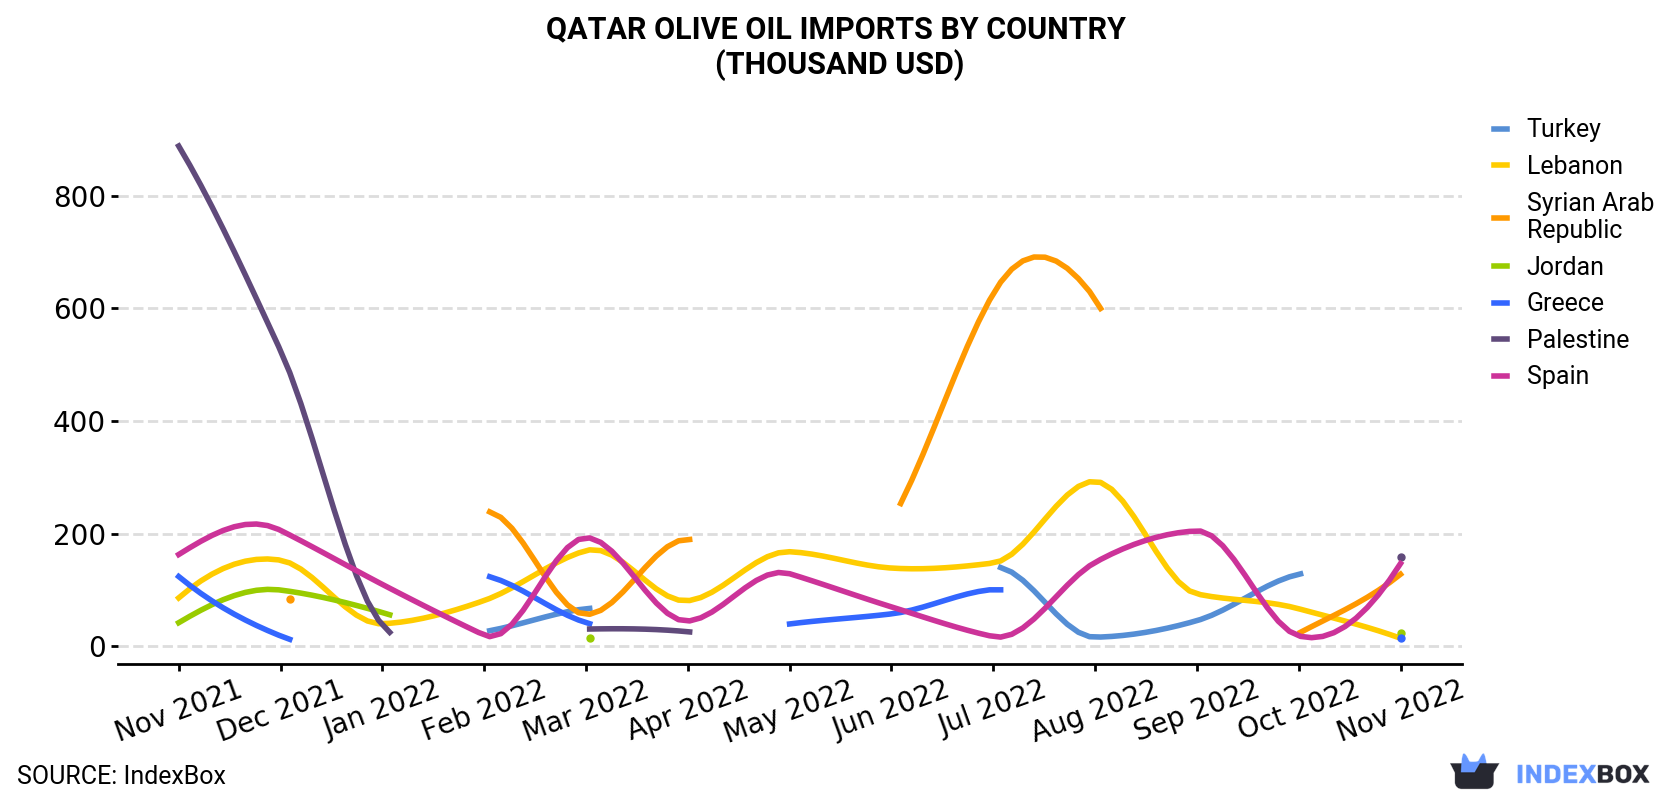 Qatar Olive Oil Imports By Country (Thousand USD)